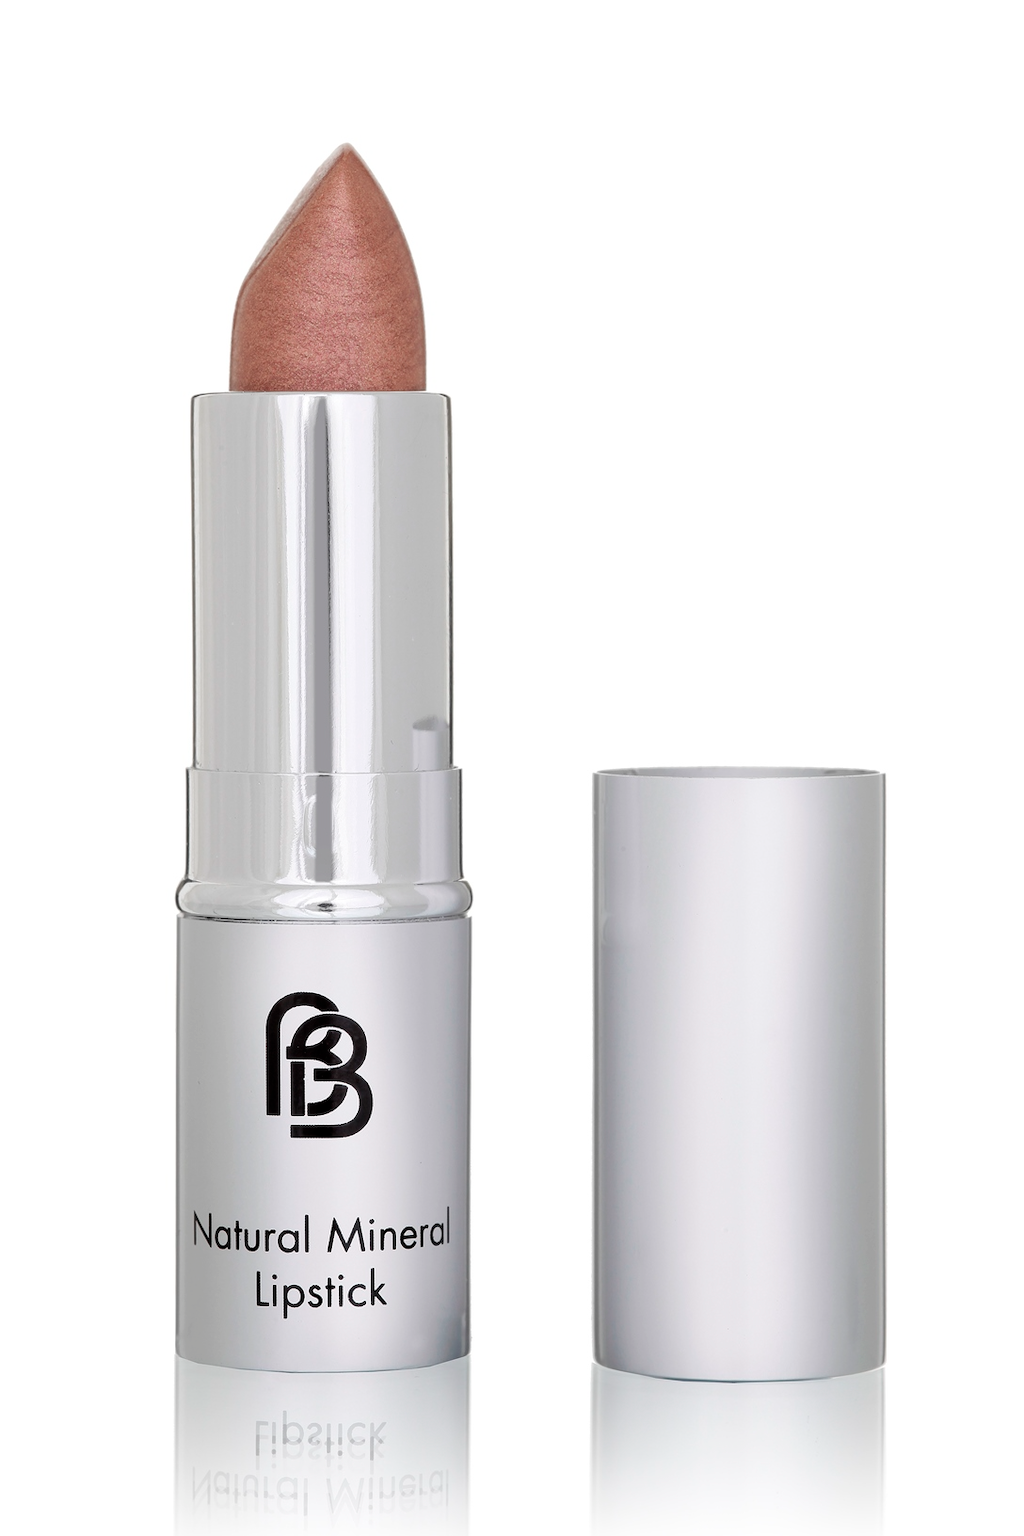 BareFaced Beauty Natural Mineral Lipstick in Copper Rose. Vegan lipstick. The mineral lipstick is pictured in a silver plastic tube with a silver lid, and the logo in black. The shade is a frosty rosy copper.